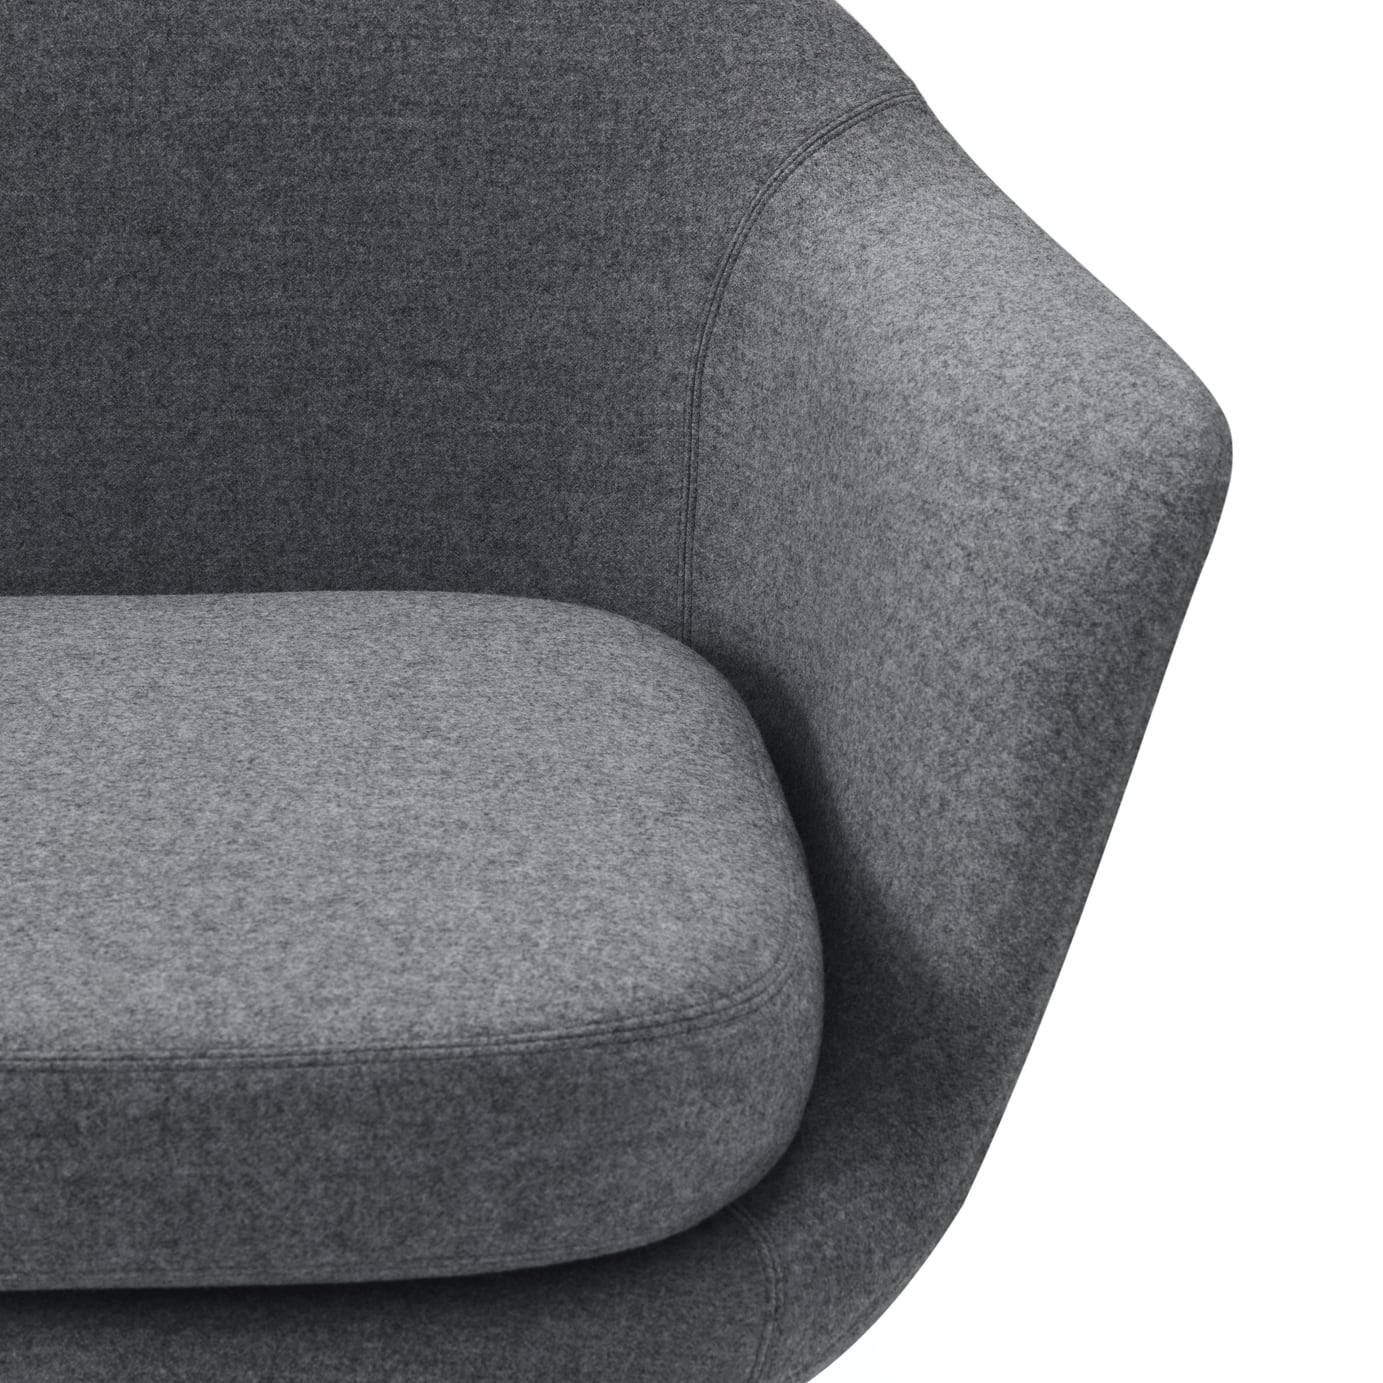 Normann Copenhagen Sum Modular 2 Seater Sofa. Made to order from someday designs. #colour_main-line-flax-temple